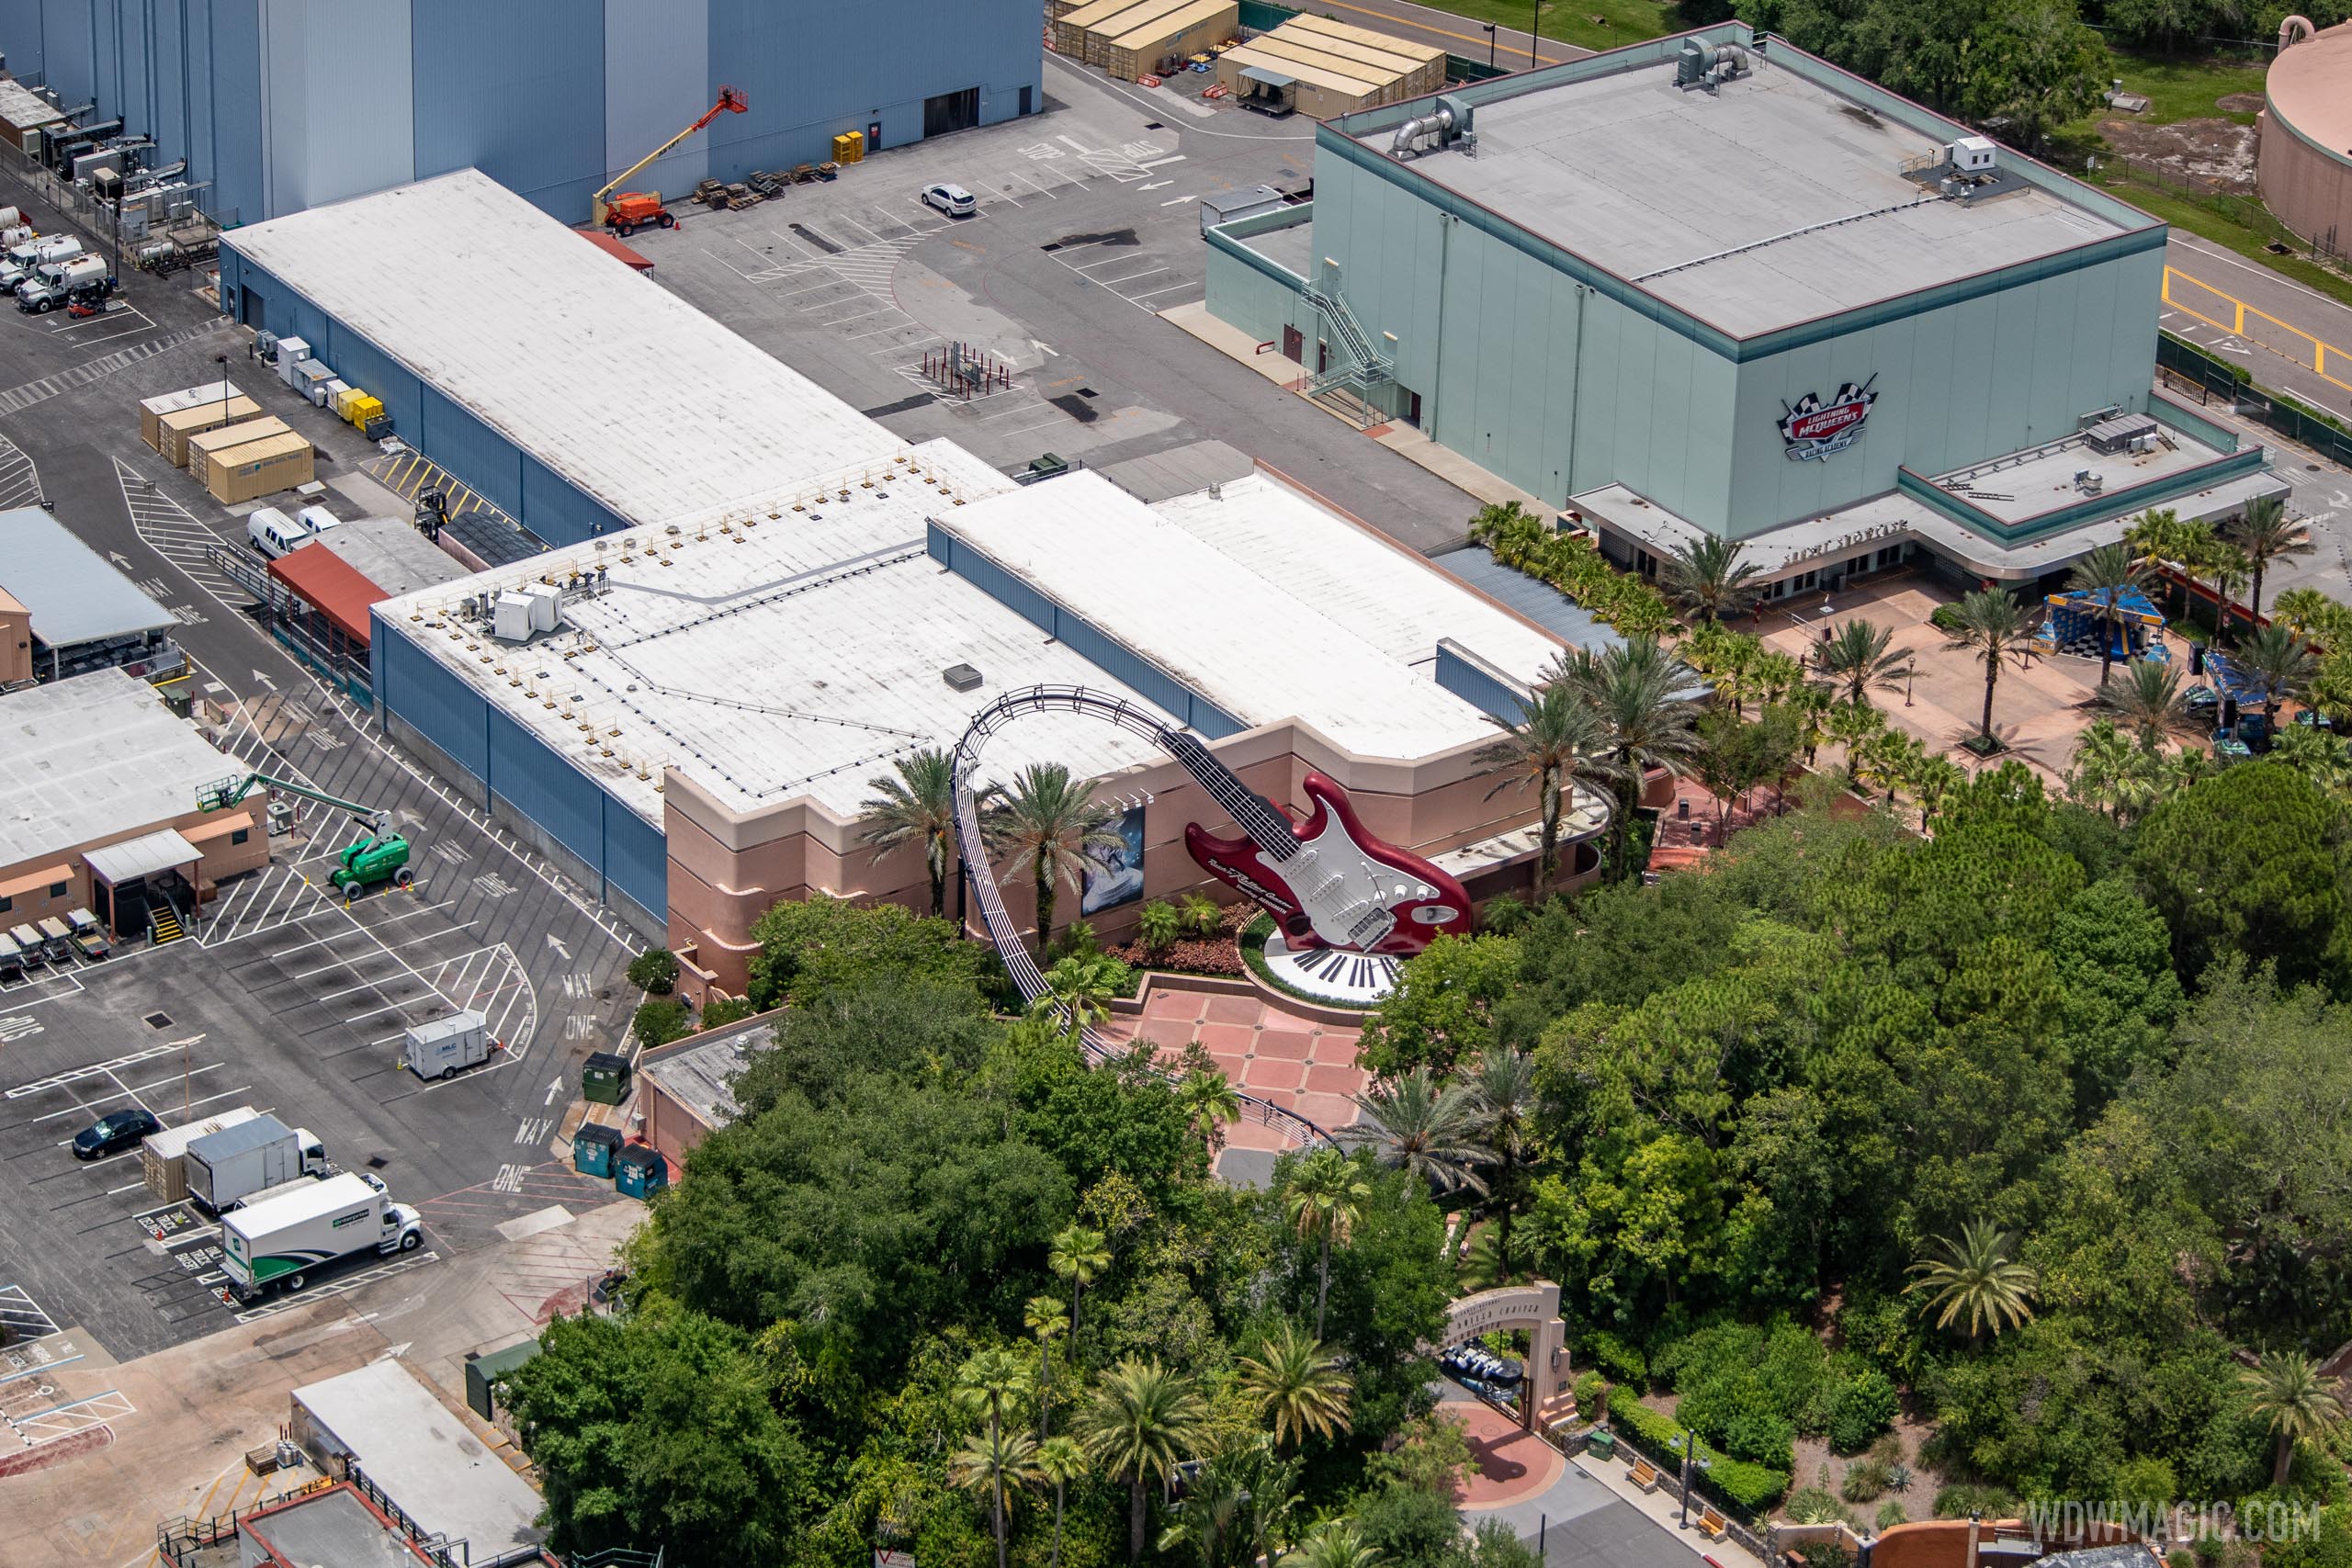 Rock ‘n’ Roller Coaster at Disney’s Hollywood Studios reopens after a 5 day closure